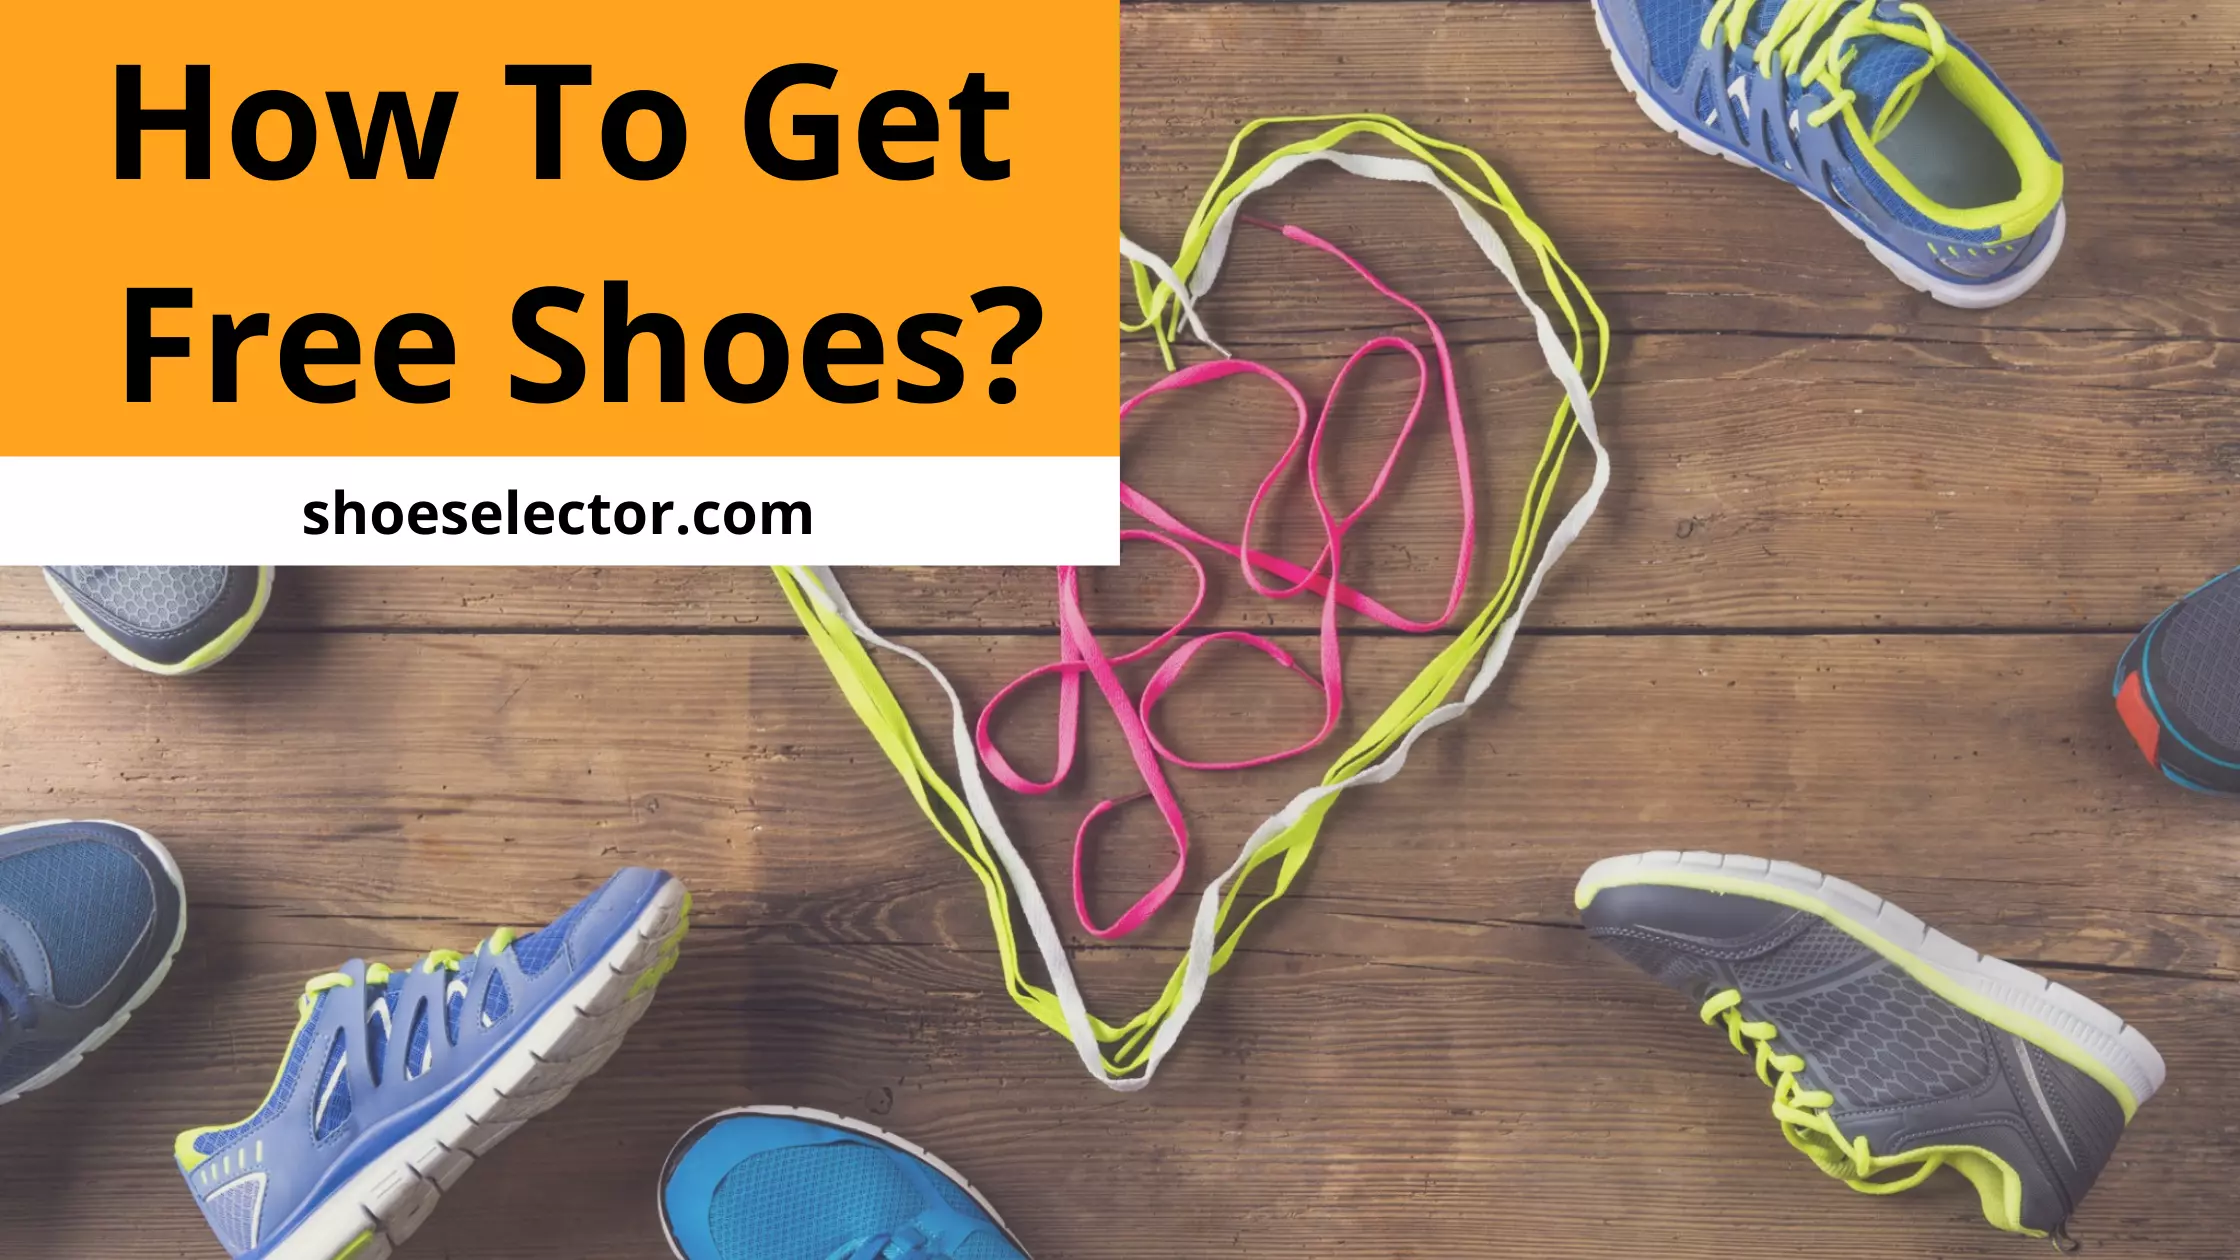 How To Get Free Shoes? 3 Simple Ways You Can Get Free Shoes